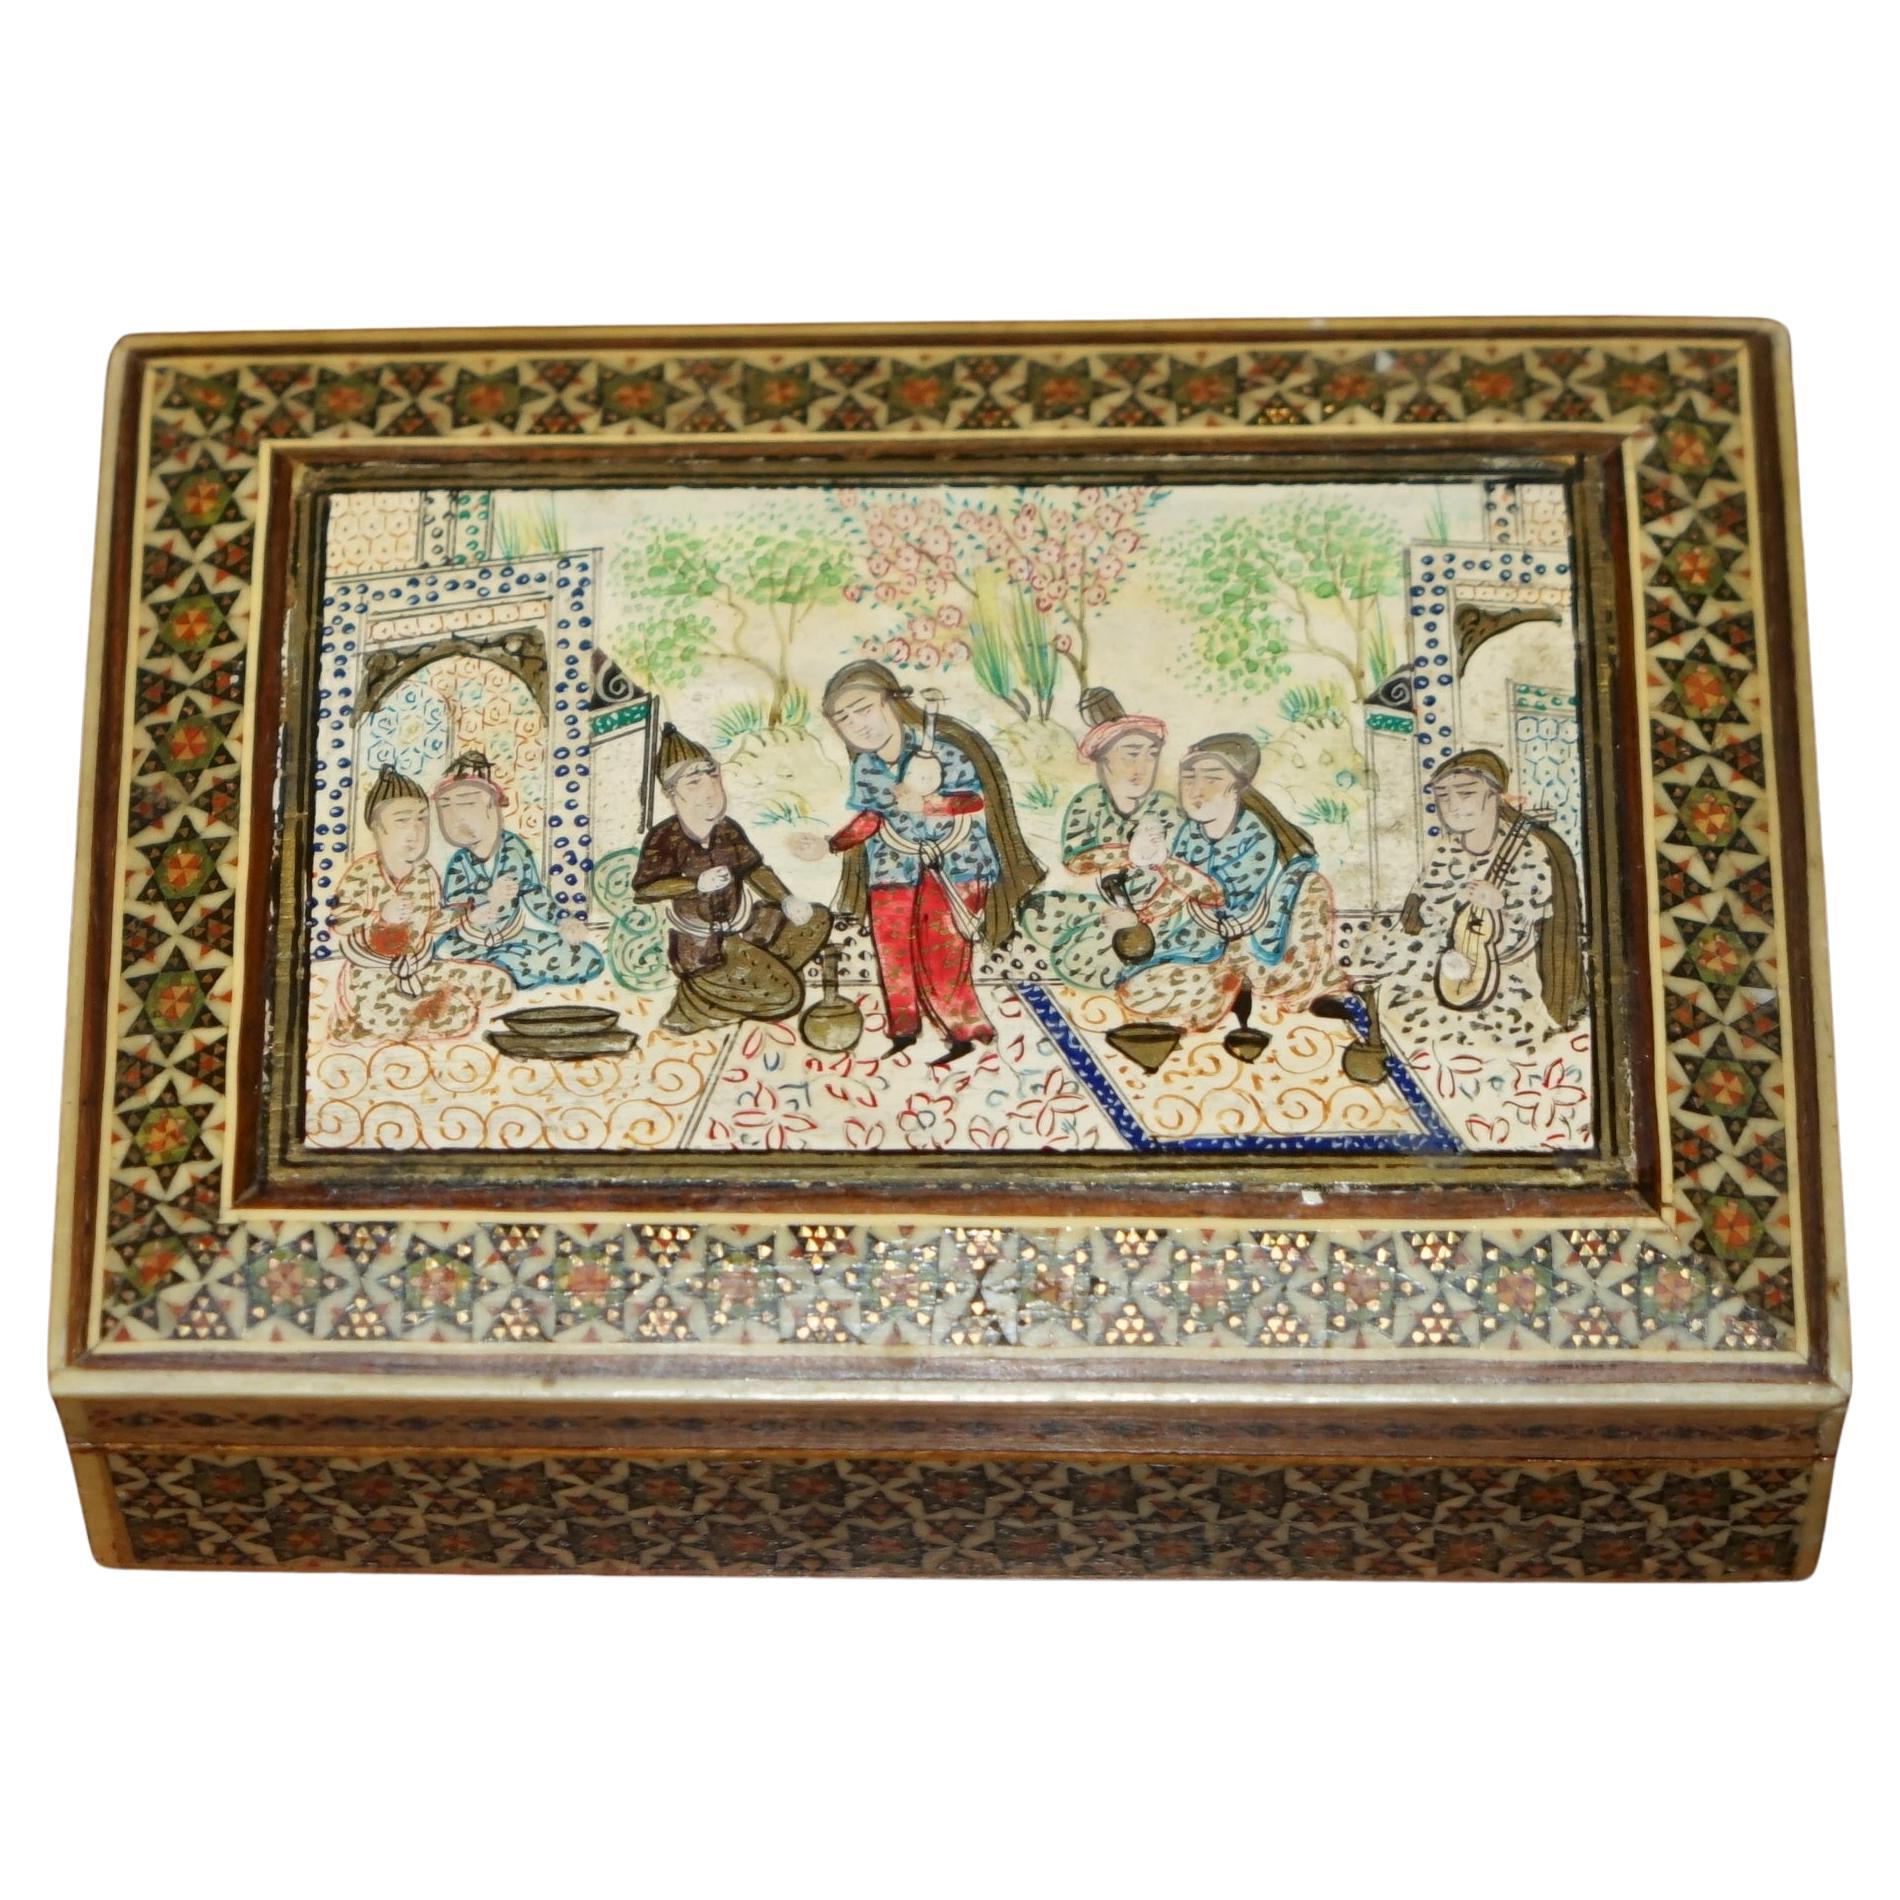 FiNE ANTIQUE PERSIAN CIGARETTE BOX DEPICTING ORIENTAL CHINESE LOOKING PEOPLE For Sale